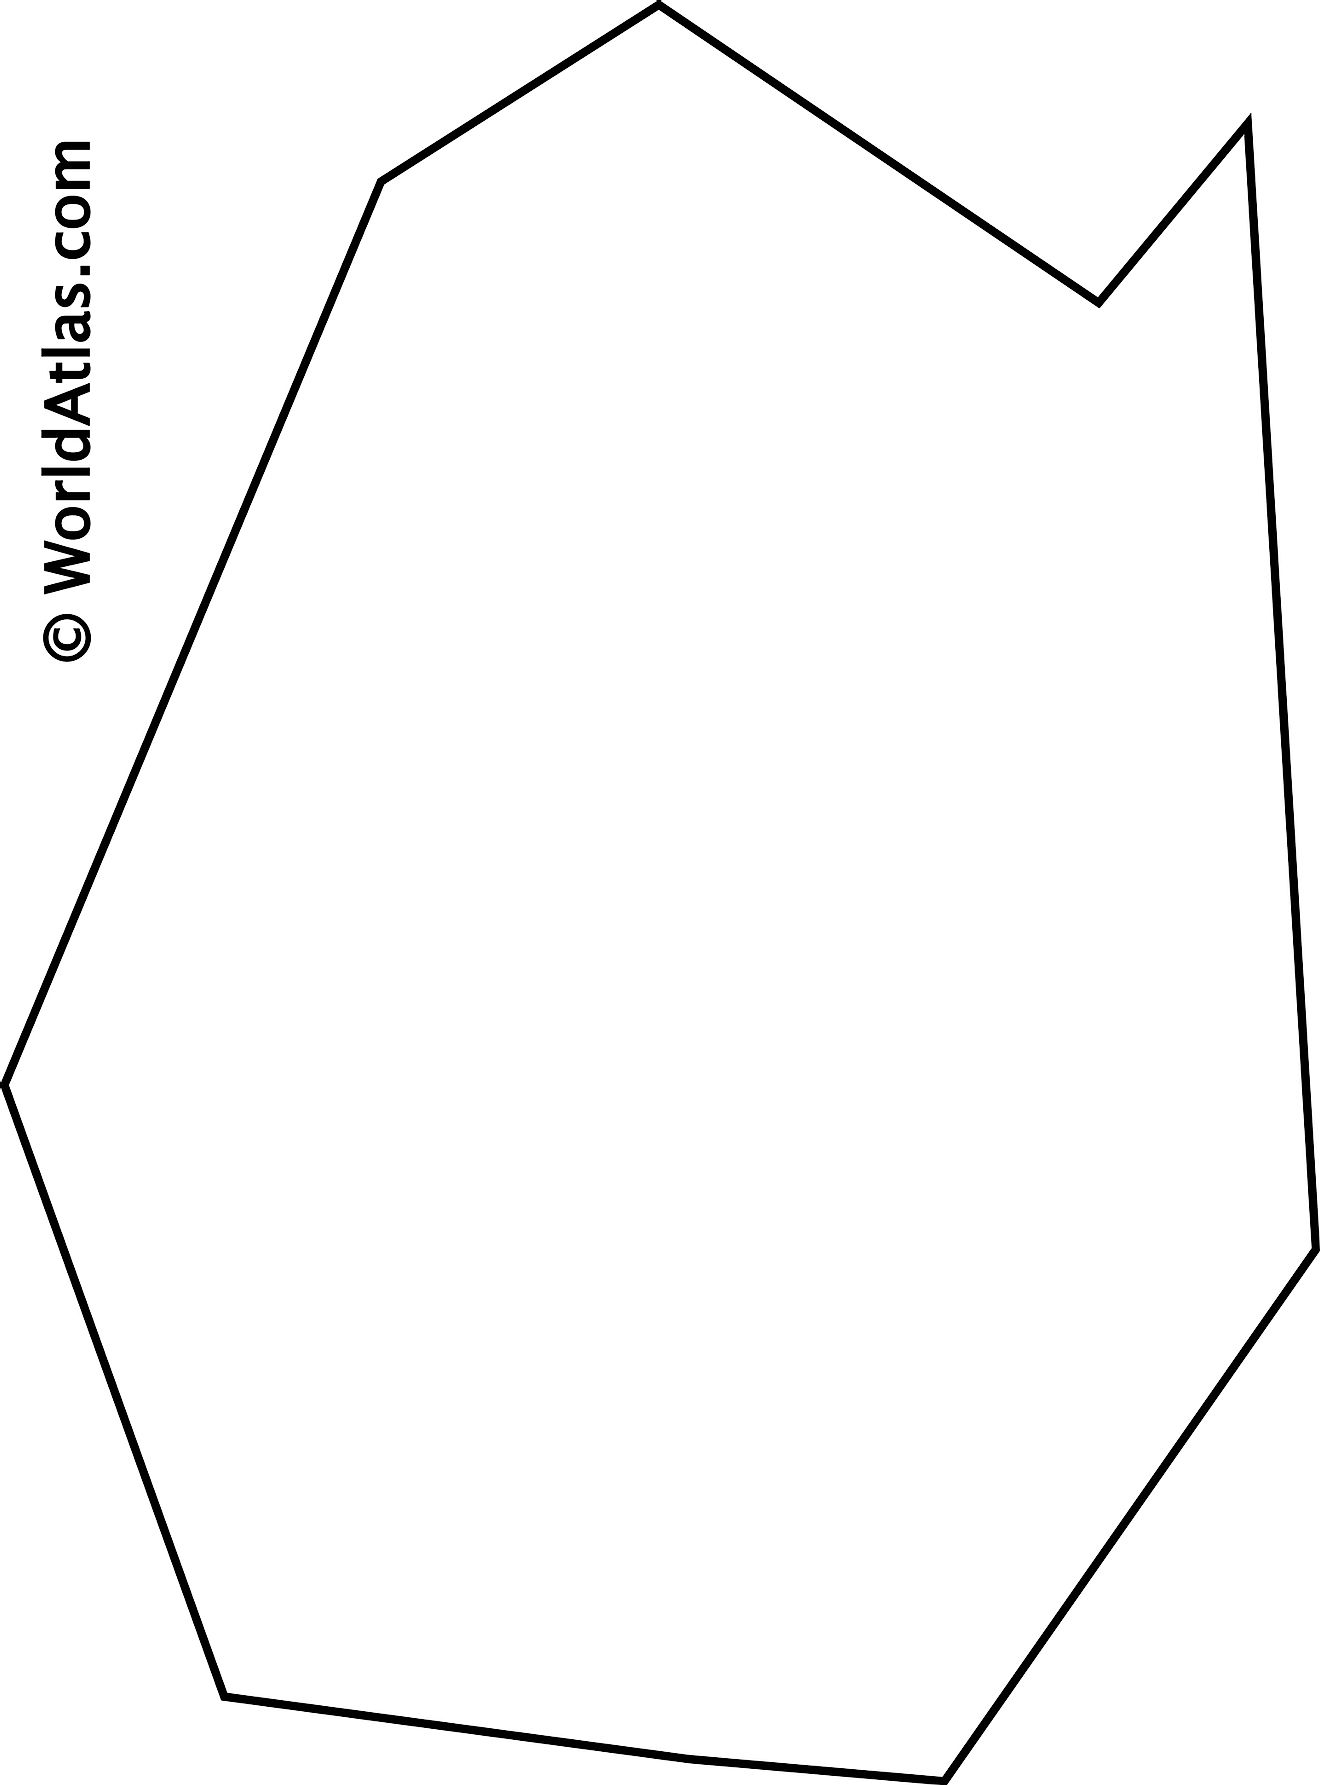 Blank Outline Map of Eswatini